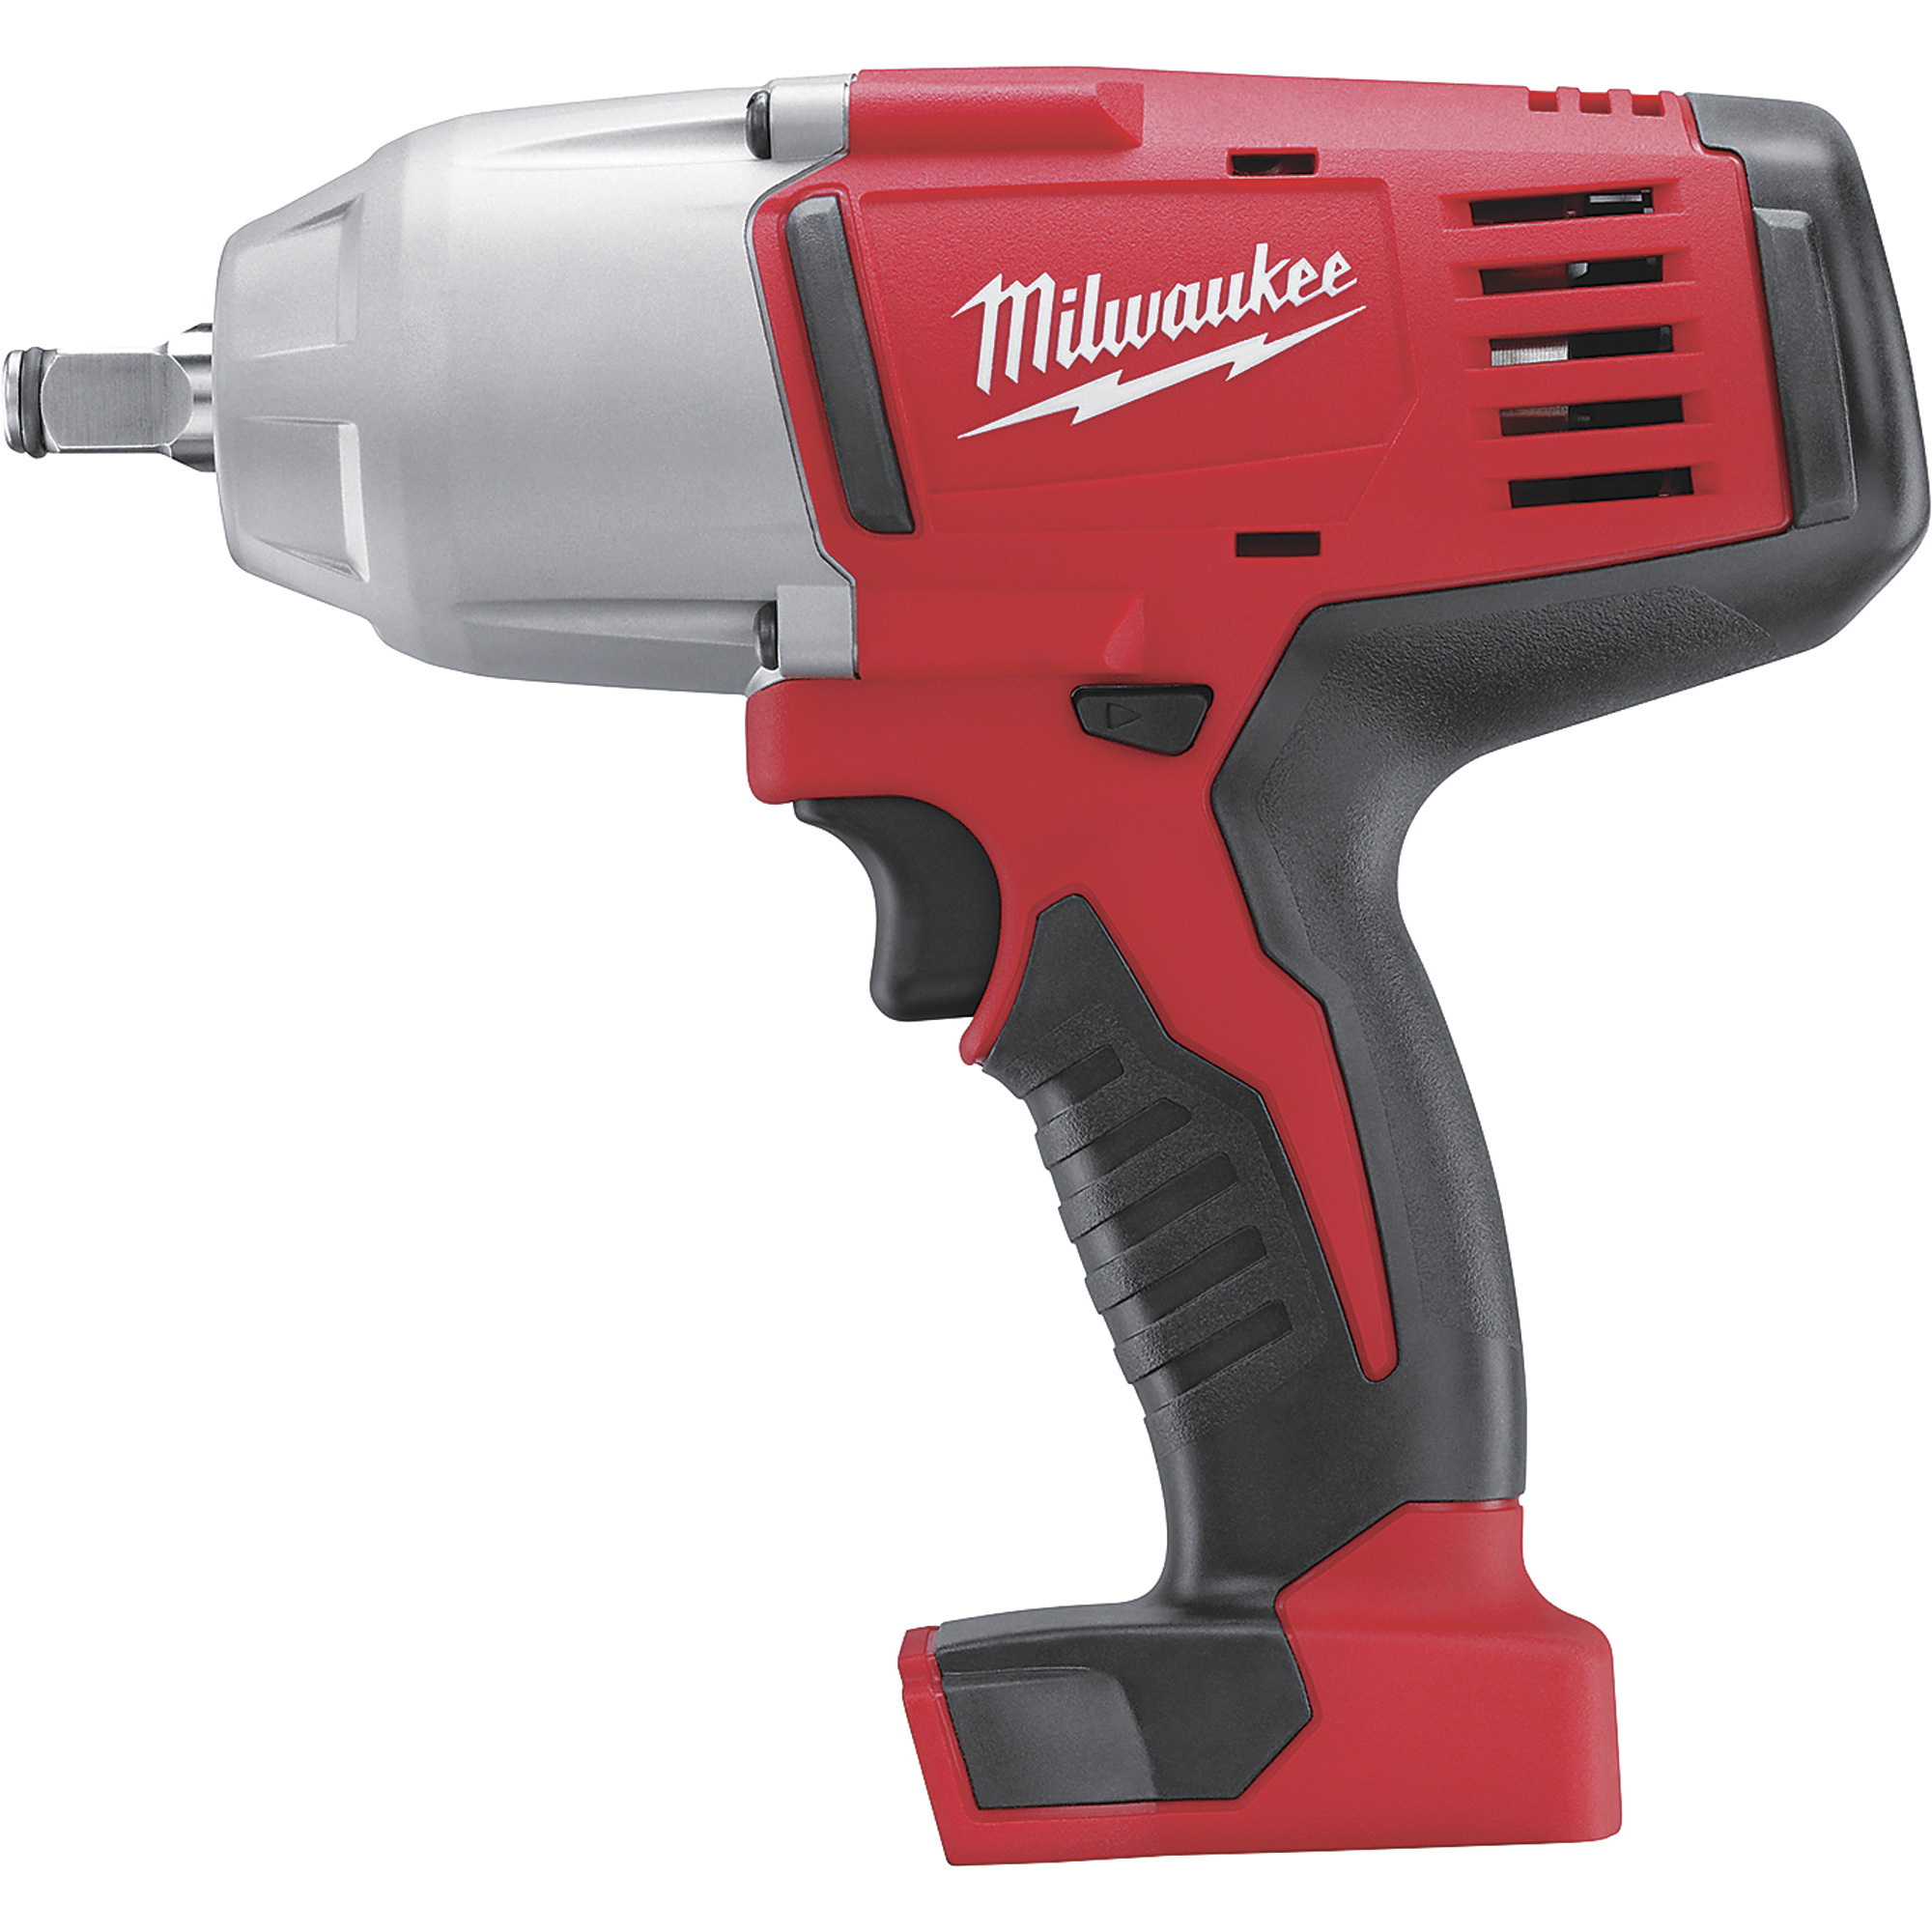 M18 Cordless Impact Wrench with Friction Ring — 1/2Inch Drive, 450 Ft.-Lbs. Torque, Tool Only, Model - Milwaukee 2663-20